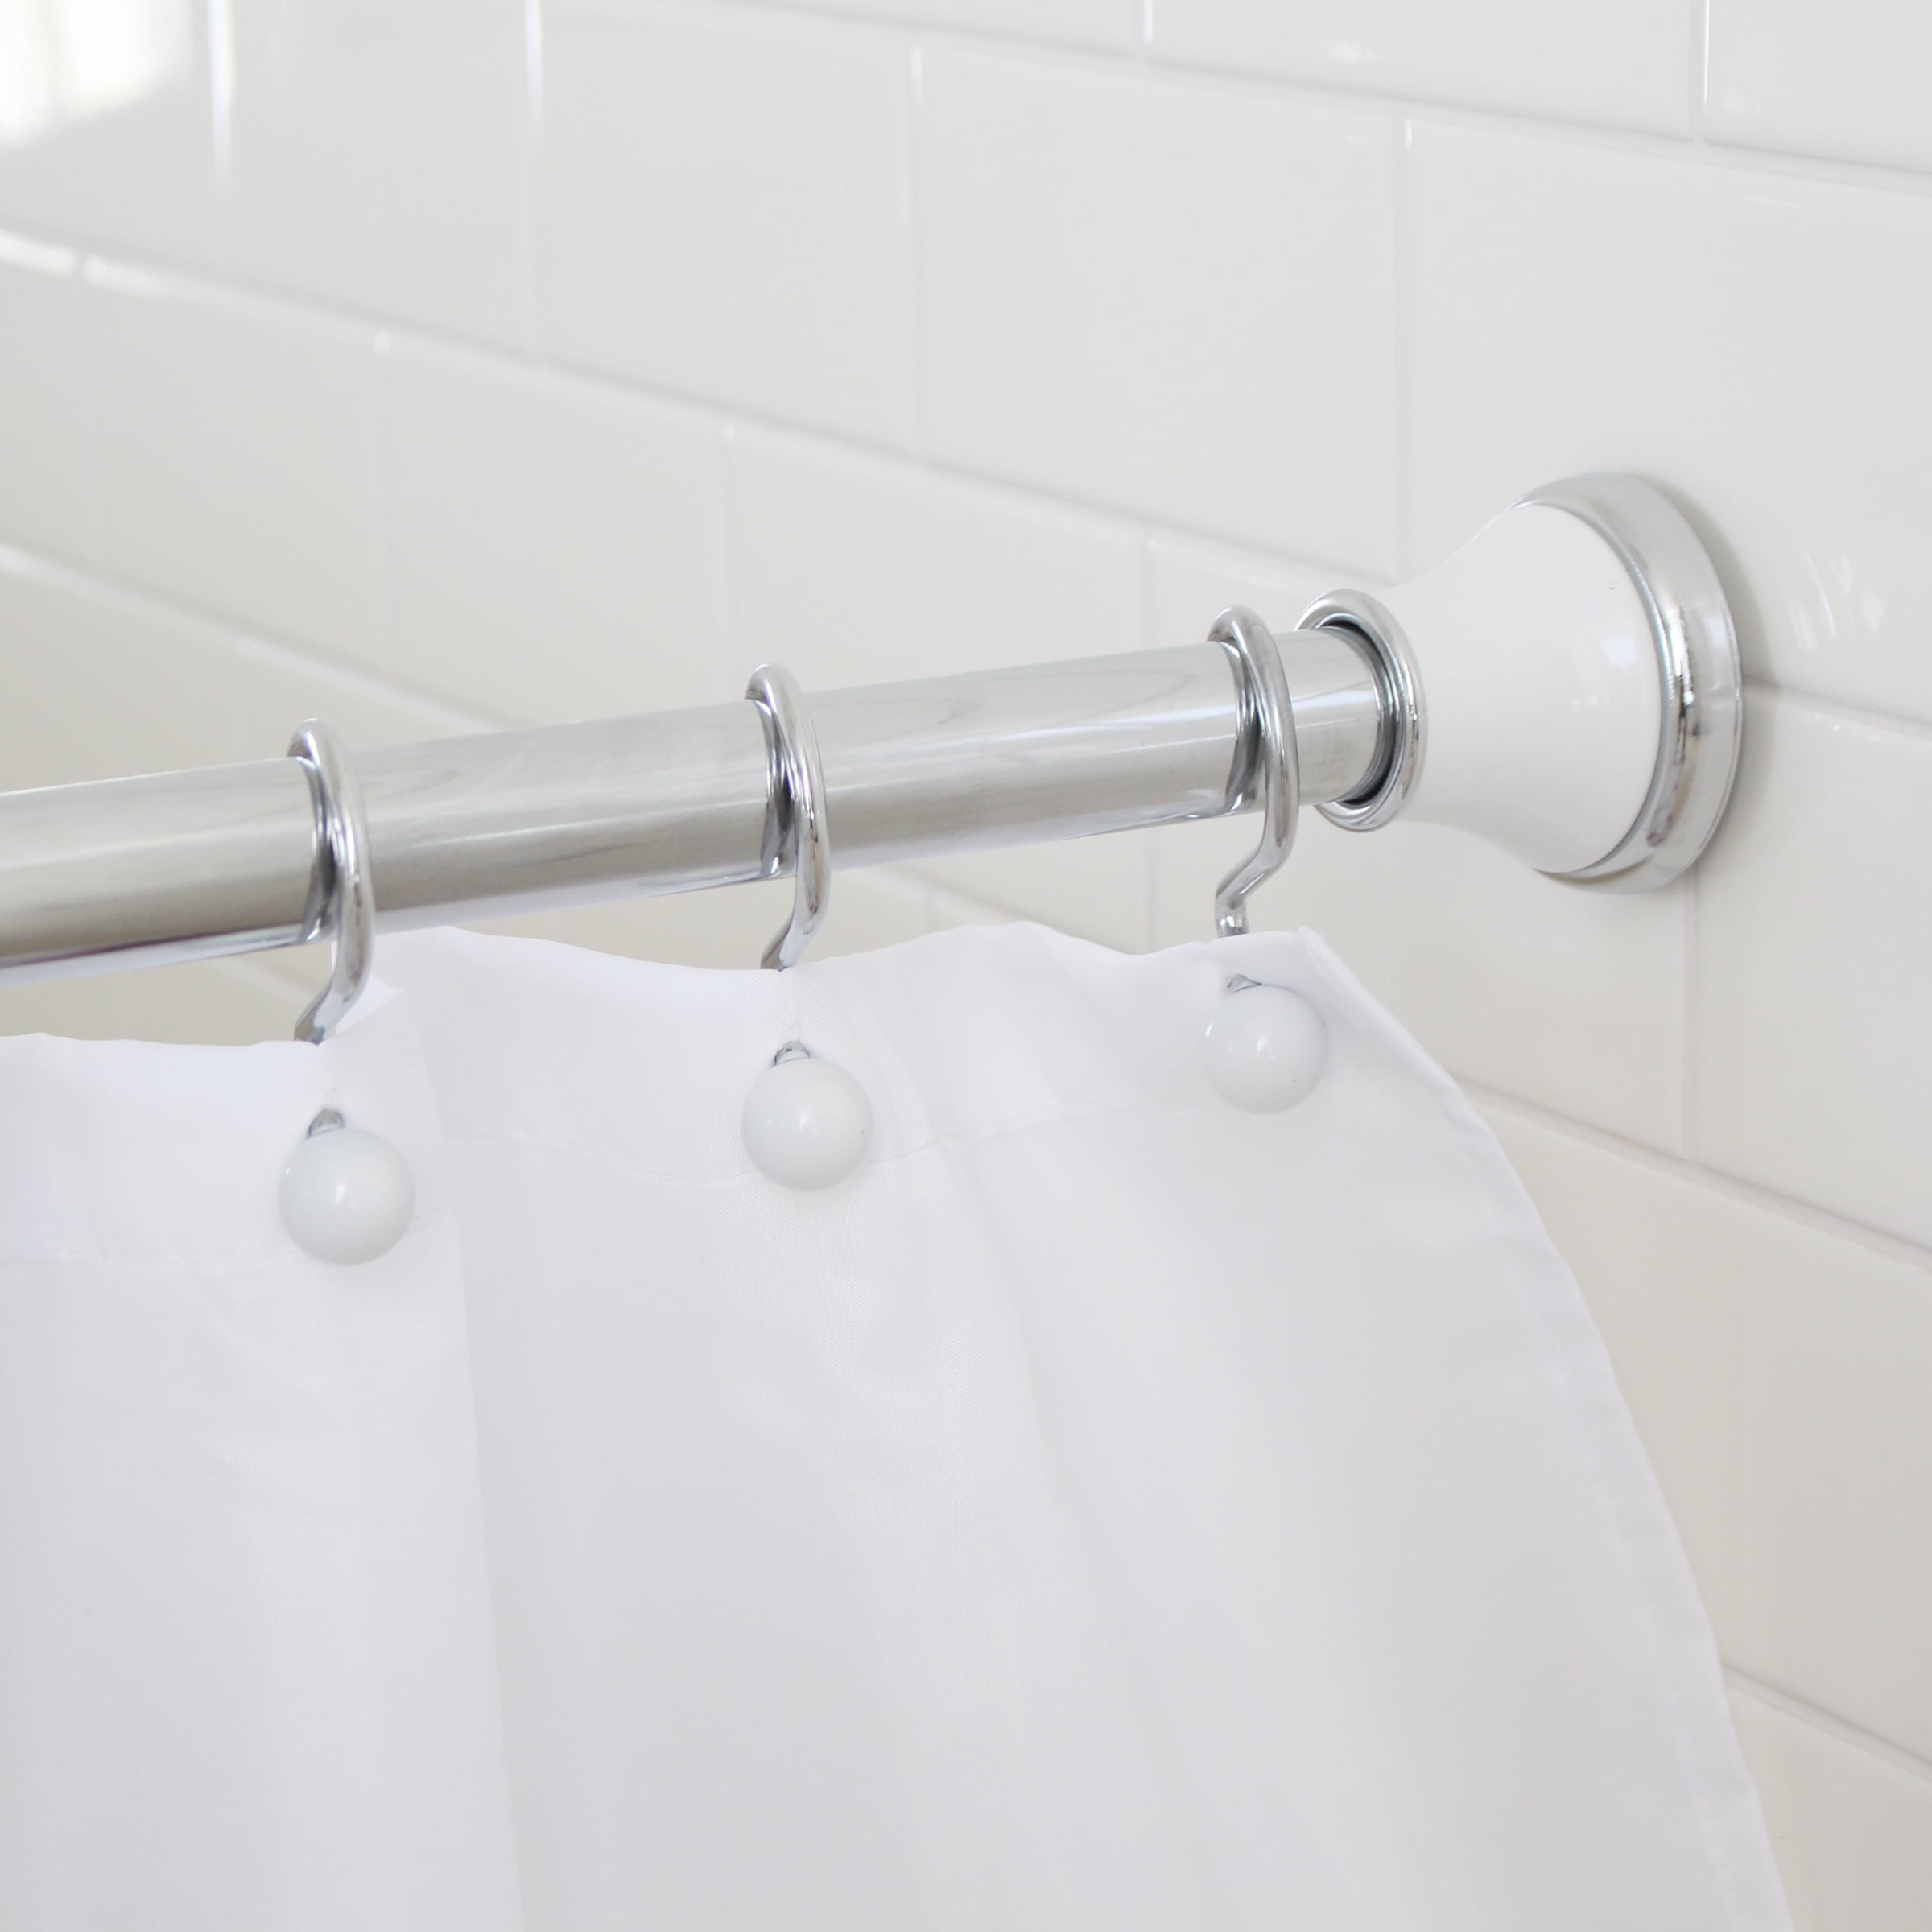 Splash Home Regal Rust Resistant Strong, How To Hang Tension Shower Curtain Rod